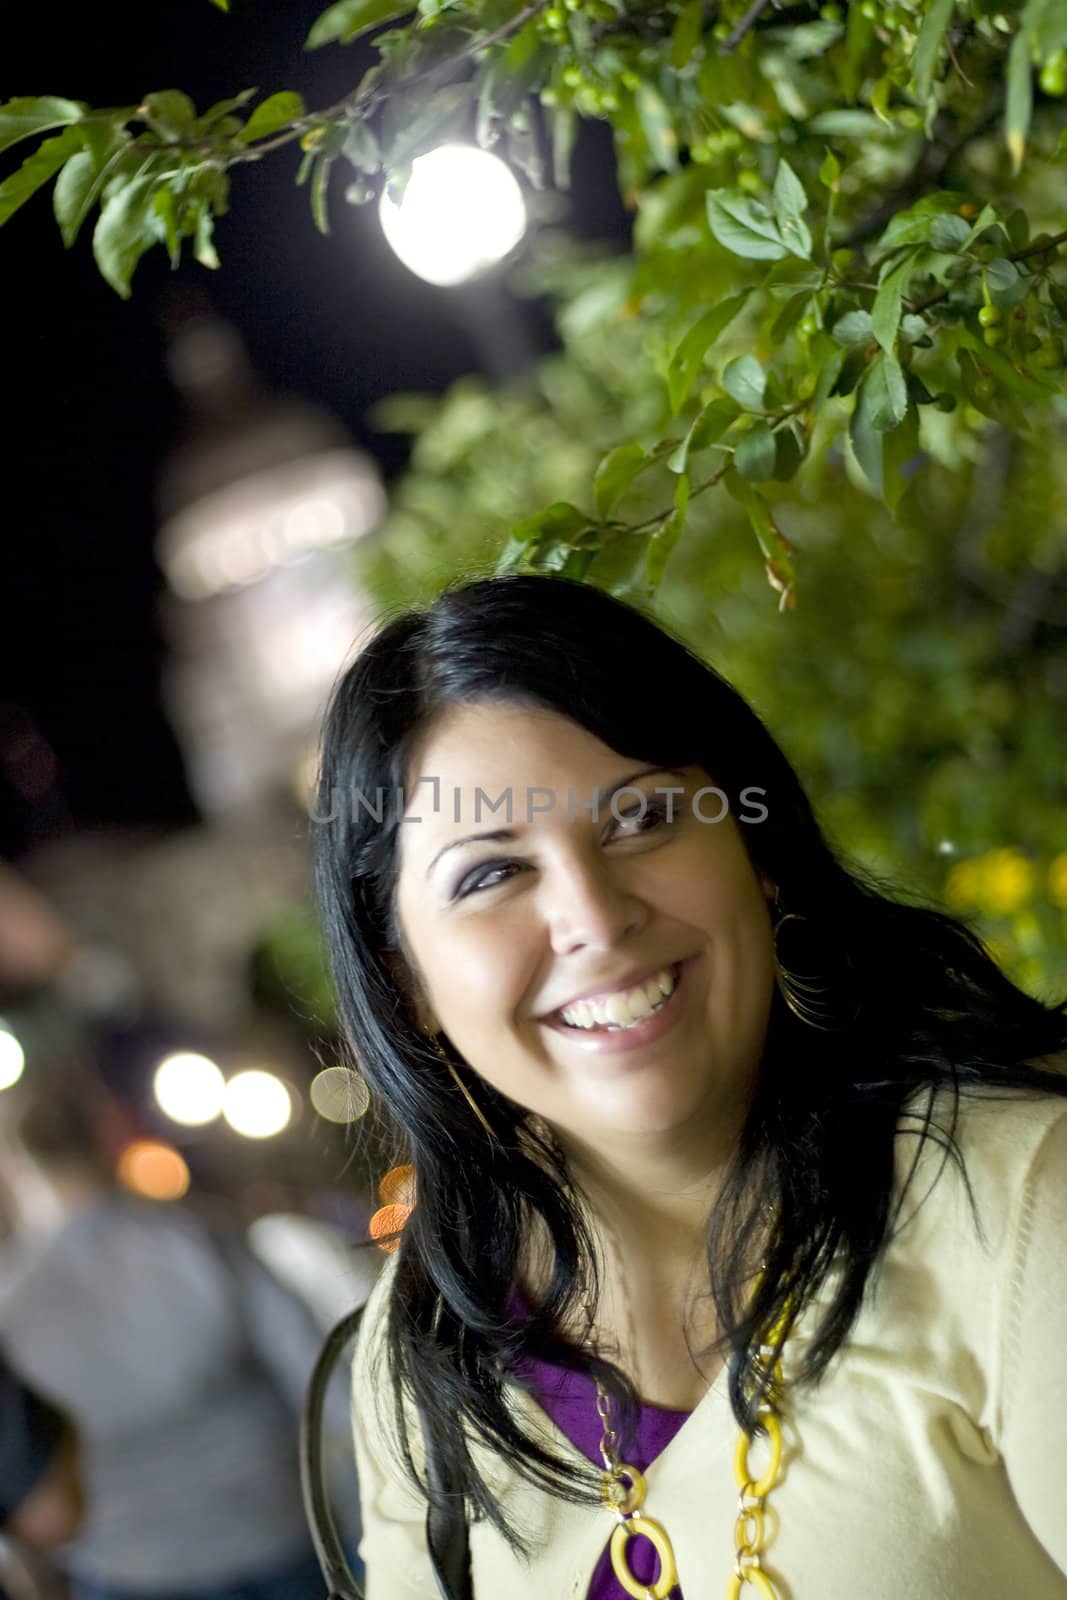 A young brunette enjoying herself in Providence, Rhode Island during the evening.